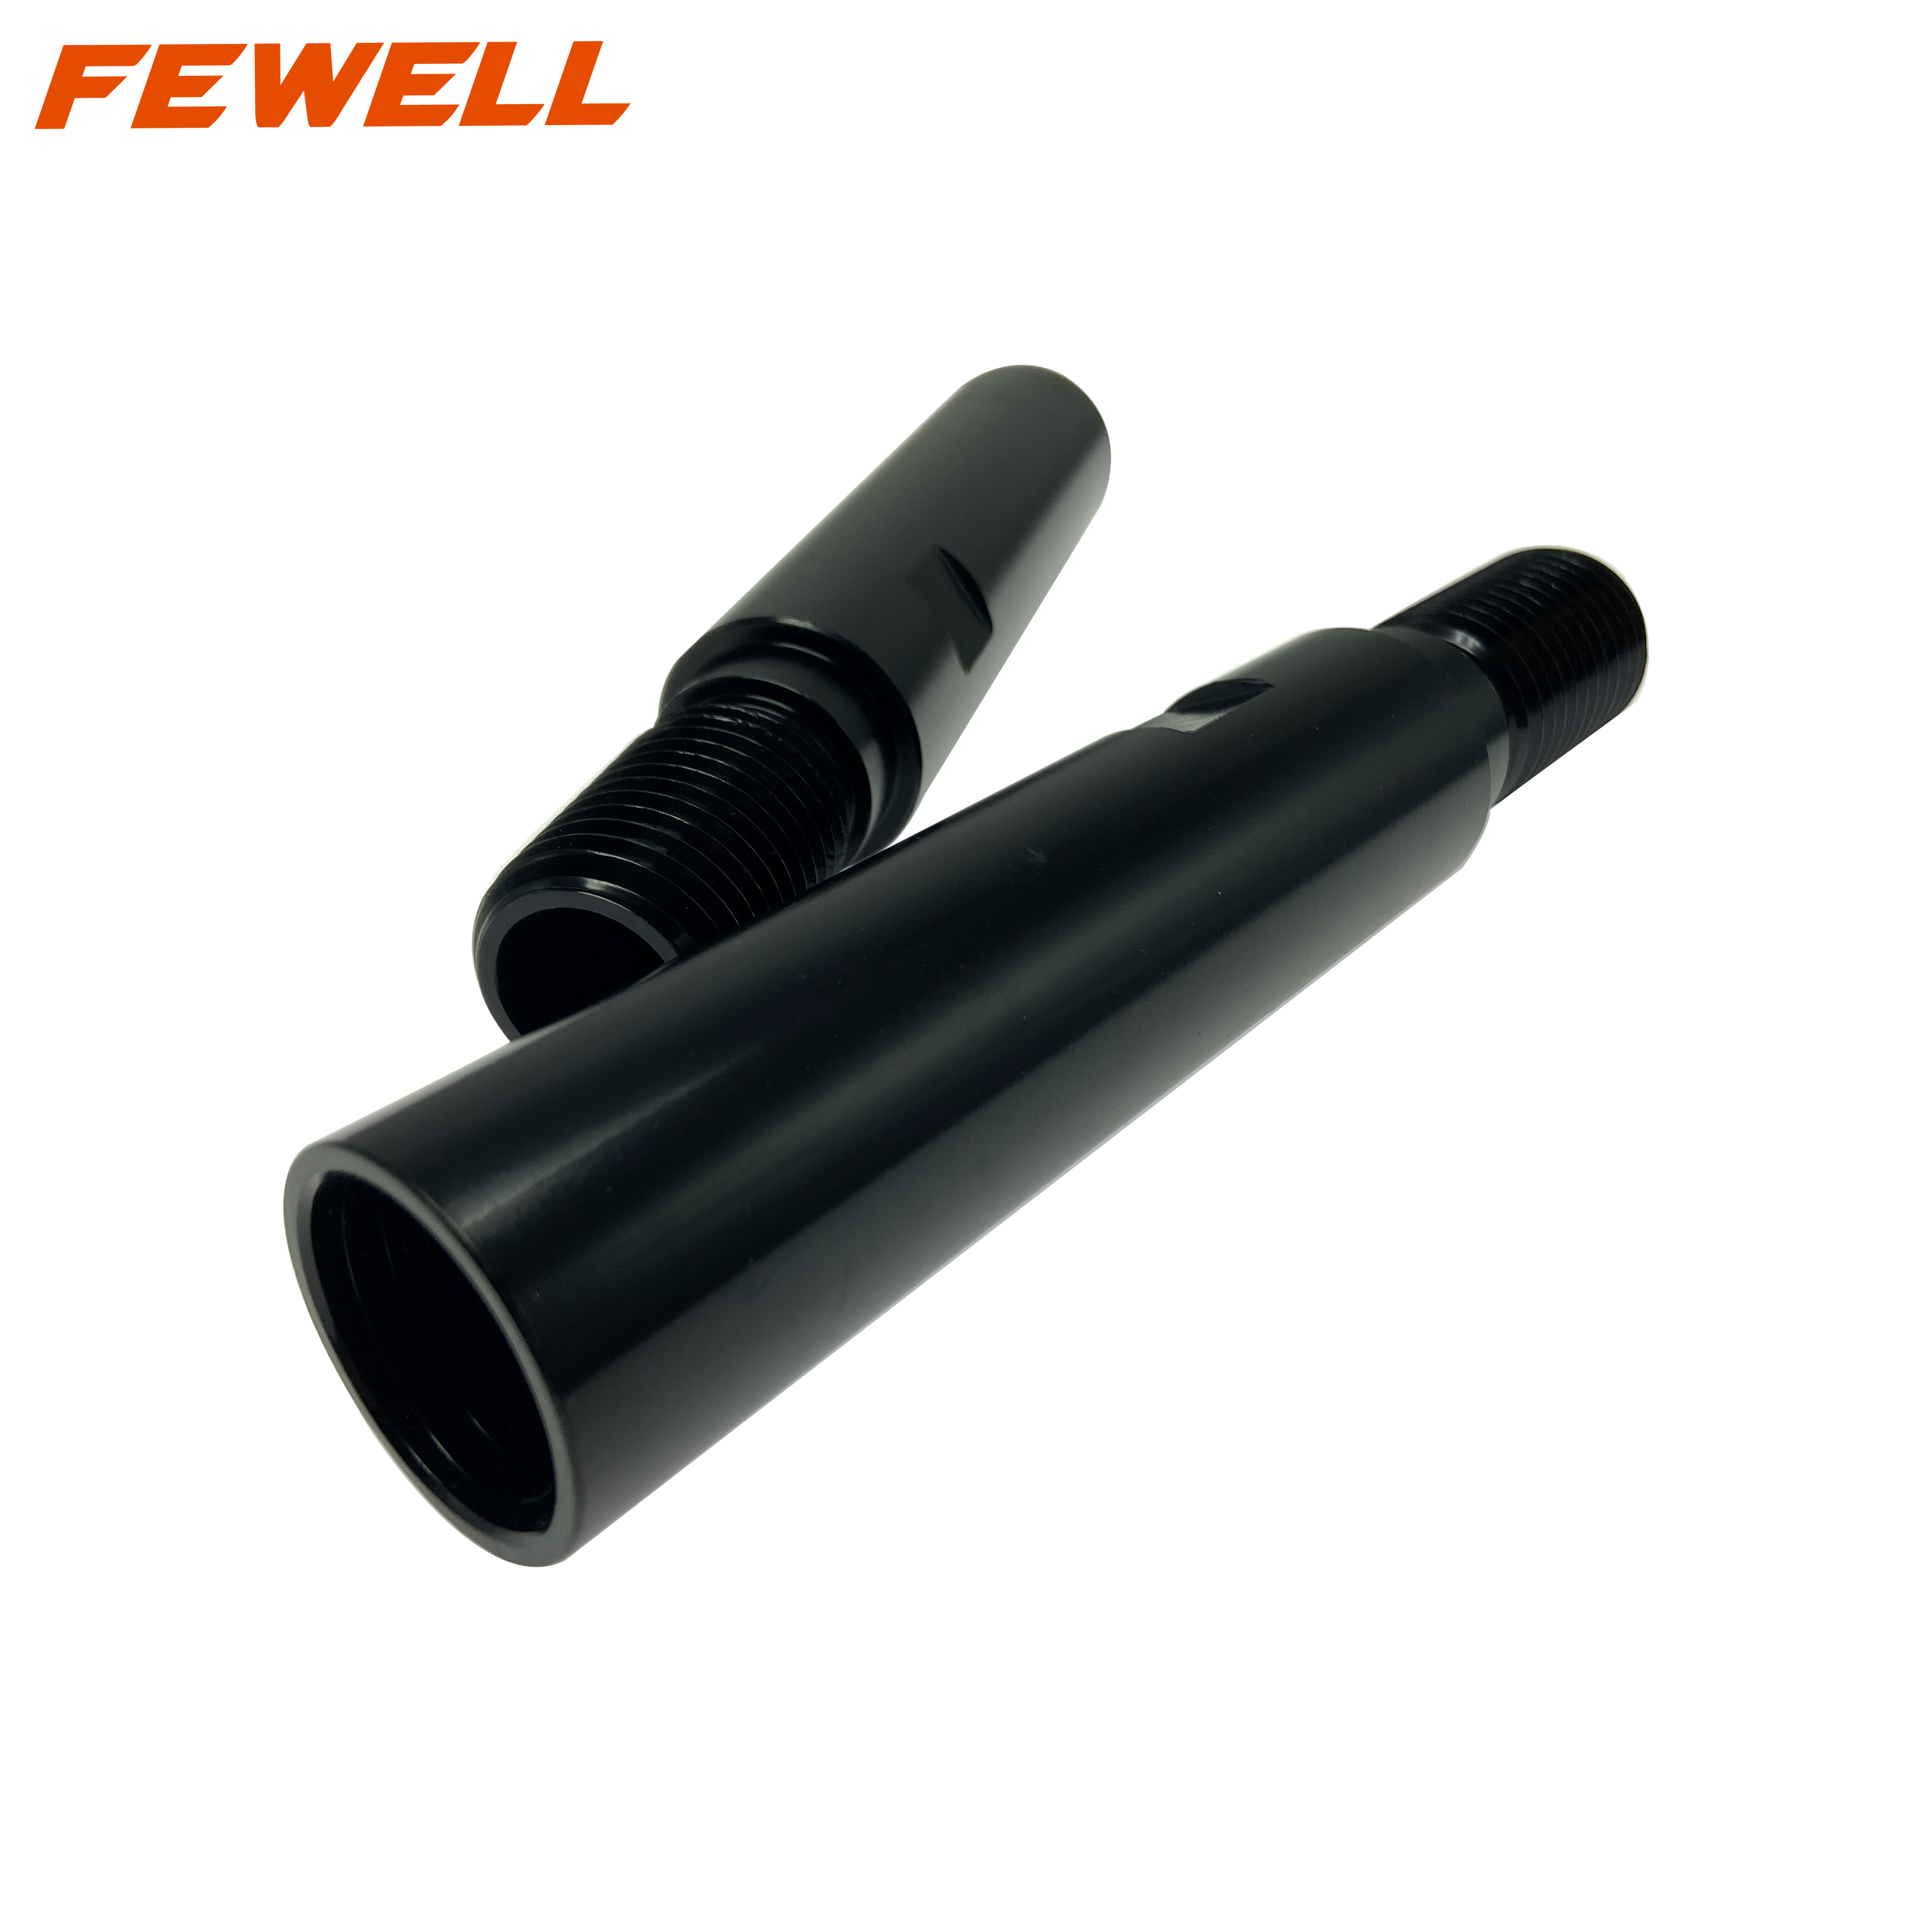 High quality 1-1/4UNC Male to1-1/4UNC 214mm Female Connection Exchange Core Drill Bit Adapter 